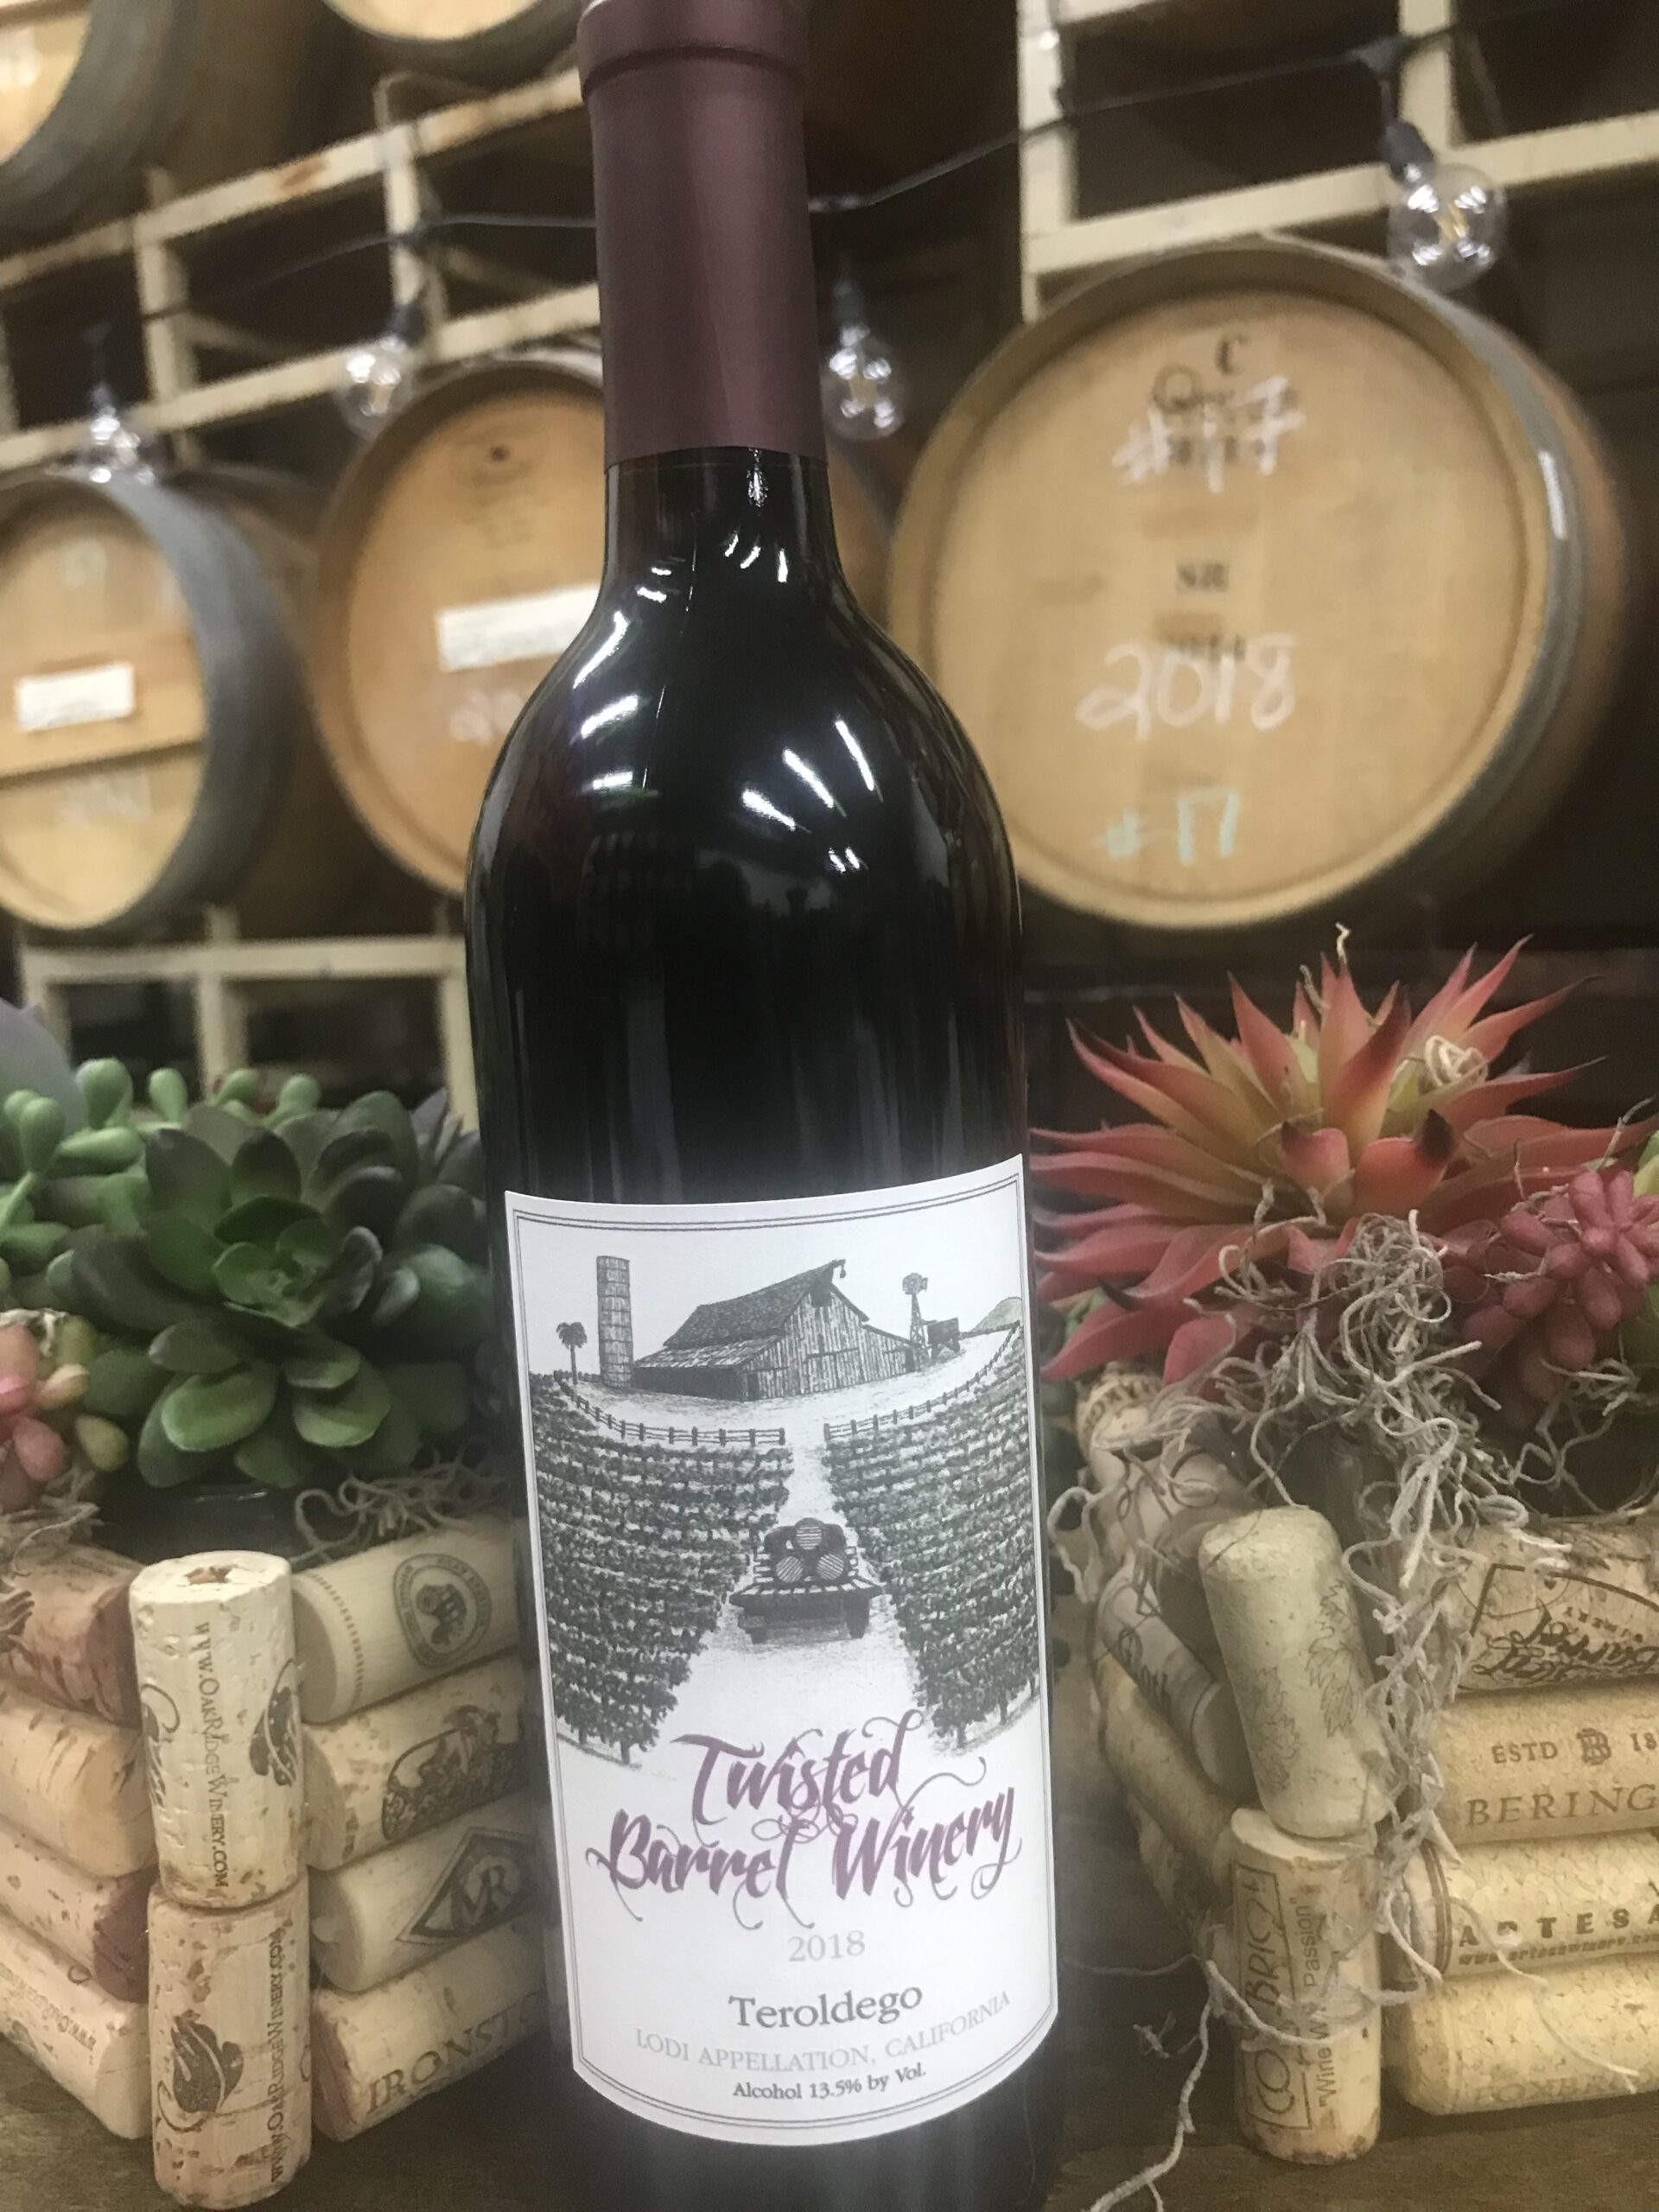 Winery Barrel Twisted | Red Wines